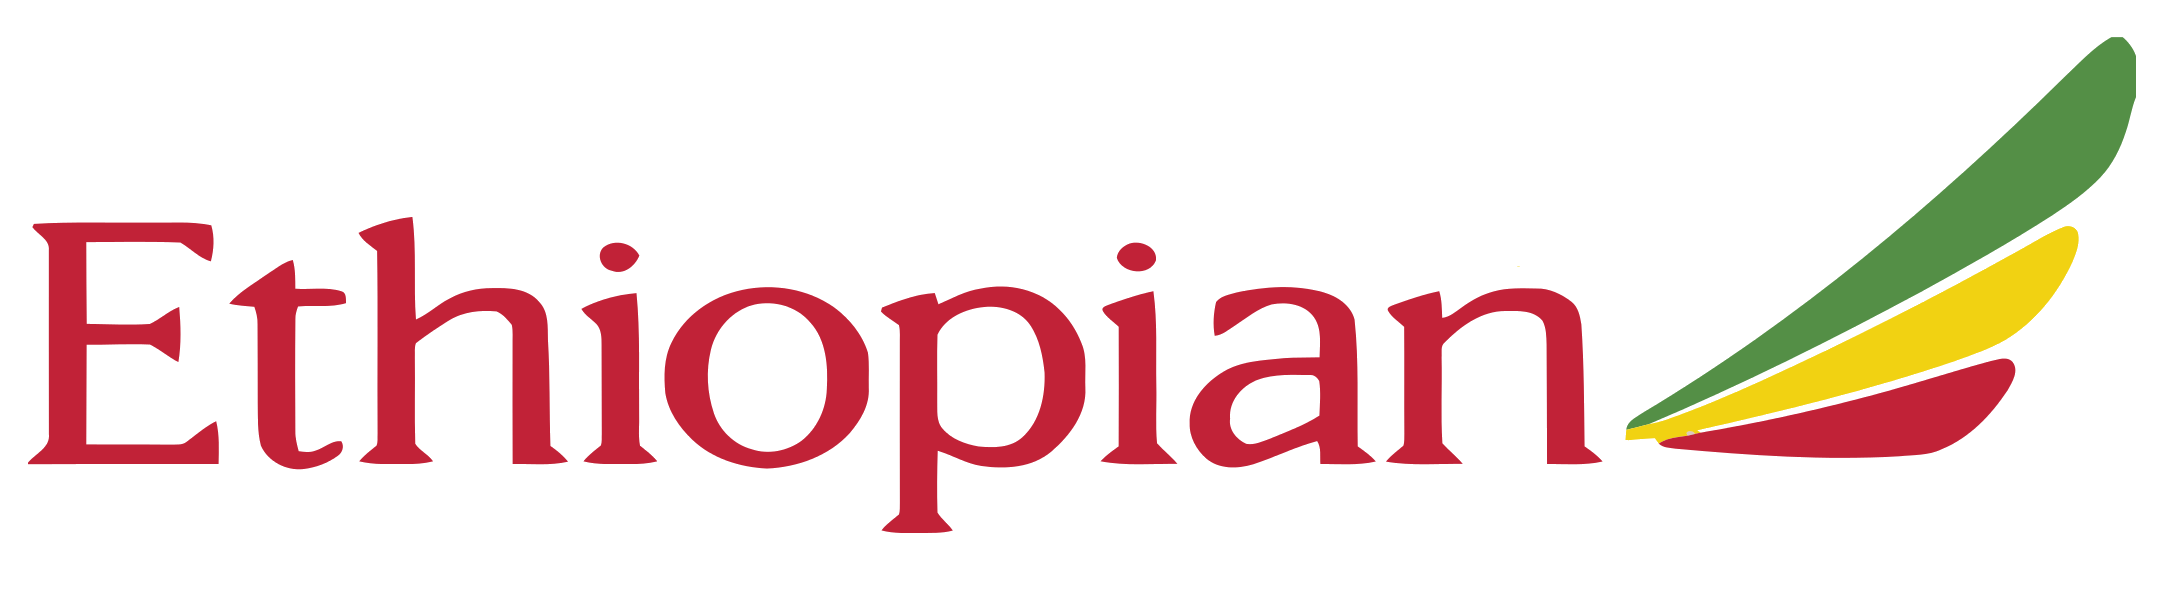 ethiopian-airlines-logo.png